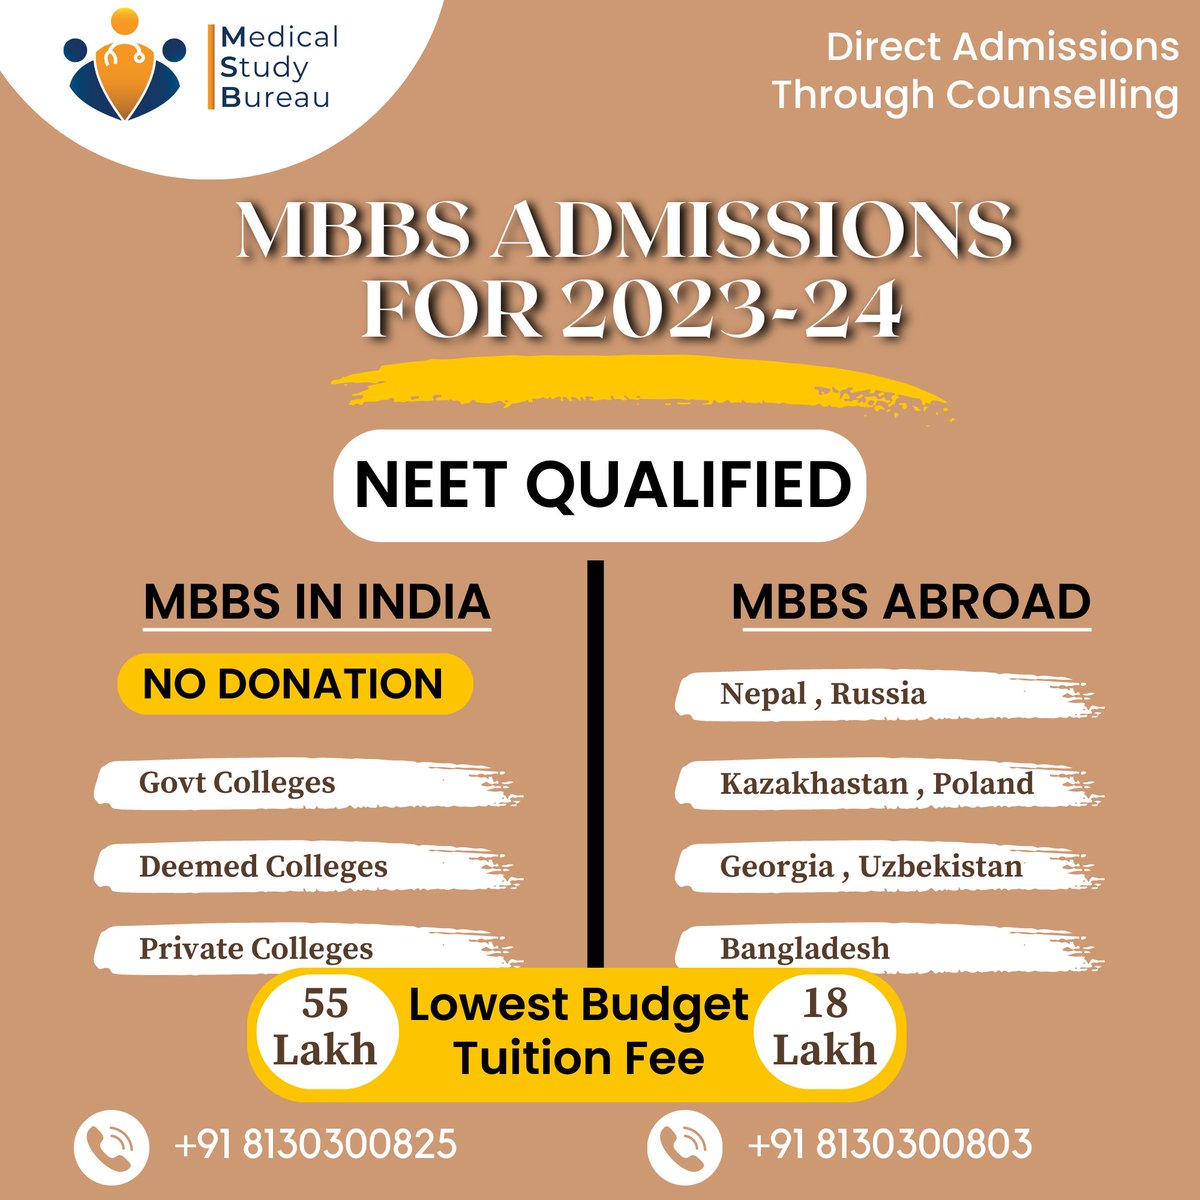 WADHWAN MEDICAL STUDY
Direct Admissions Through Counselling
MBBS ADMISSIONS
FOR 2023-24

Contact Us :
+91 8130300825
Mail Us :
Info@medicalstudyburea.co.in
.
#DirectAdmissionsThroughCounselling
#MBBSAdmissions
#2023Admissions
#NEETQualified
#MBBSinIndia
#NoDonation
#GovtColleges